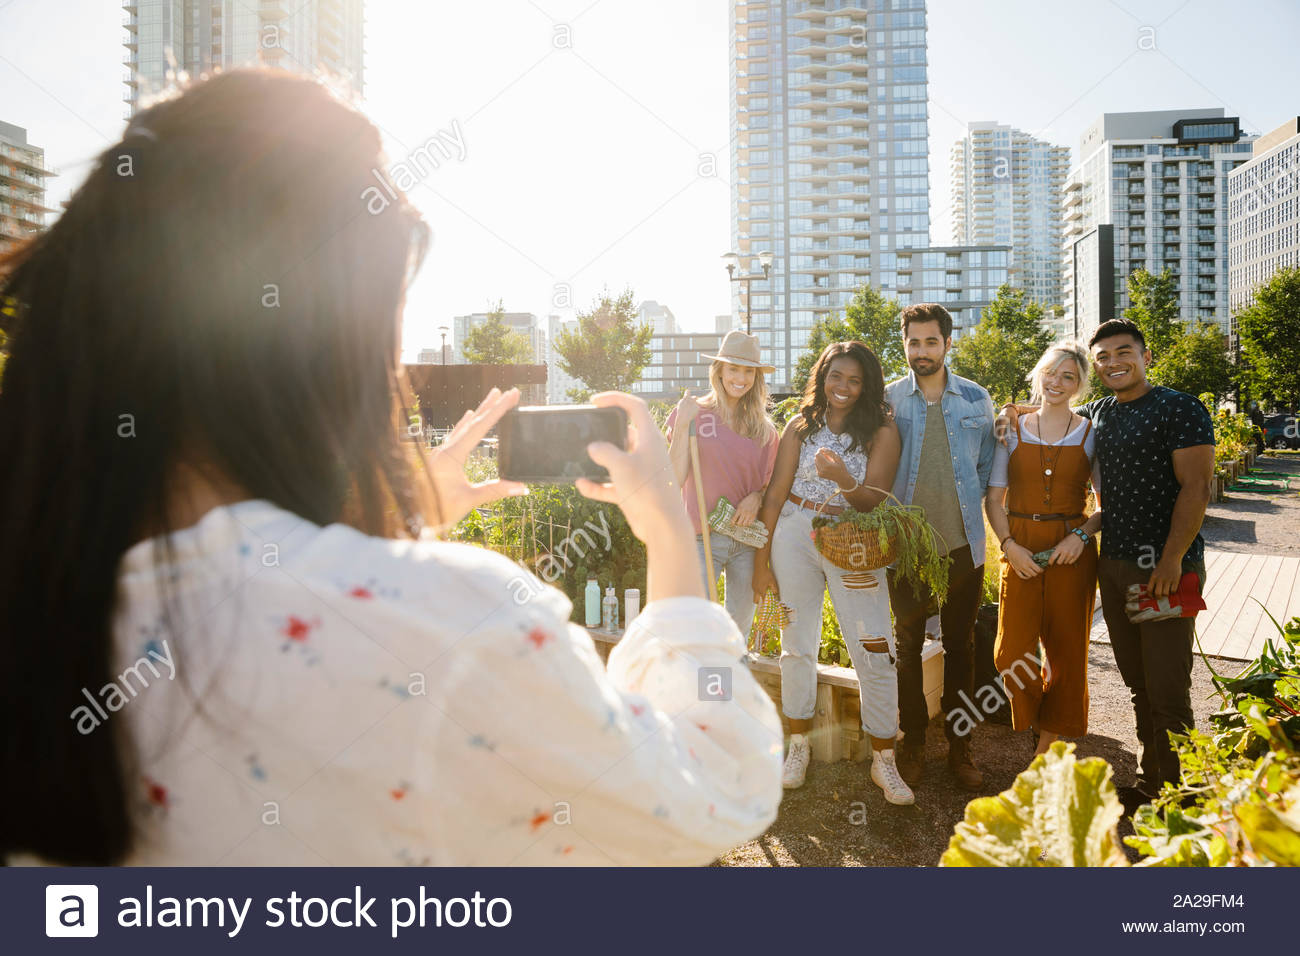 Young woman with camera phone photographing friends in sunny, urban community garden Stock Photo